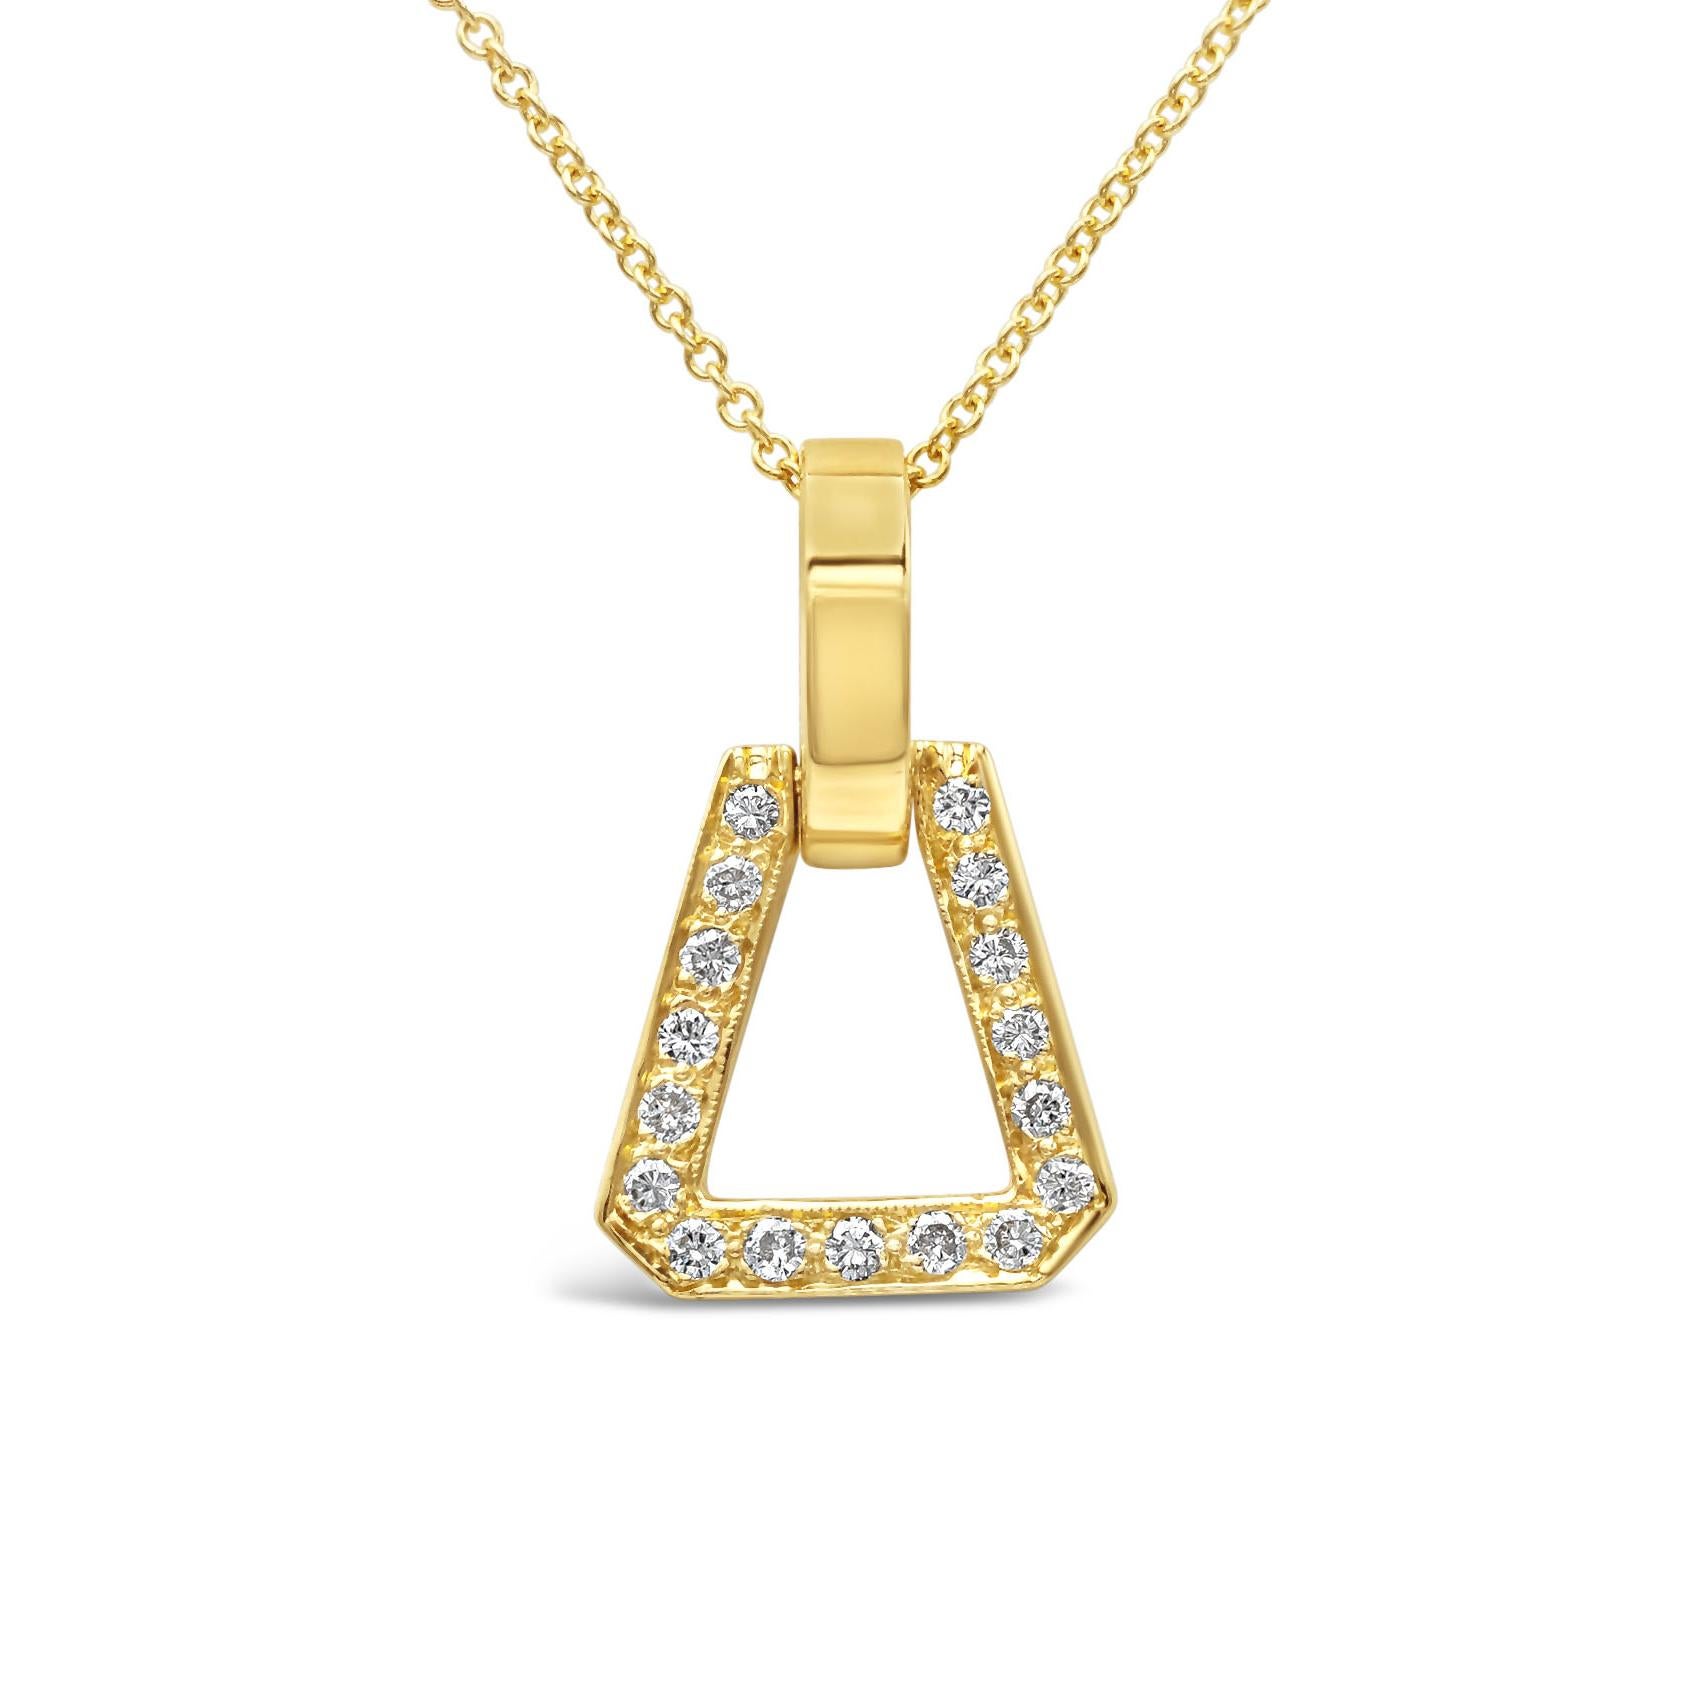 A beautiful and unique pendant showcasing a triangular open-work design set with 0.38 carats of round brilliant diamonds. Diamonds are approximately F-G color, SI1 clarity. Made in Yellow Gold. Suspended on an 18 inch adjustable yellow gold chain.


